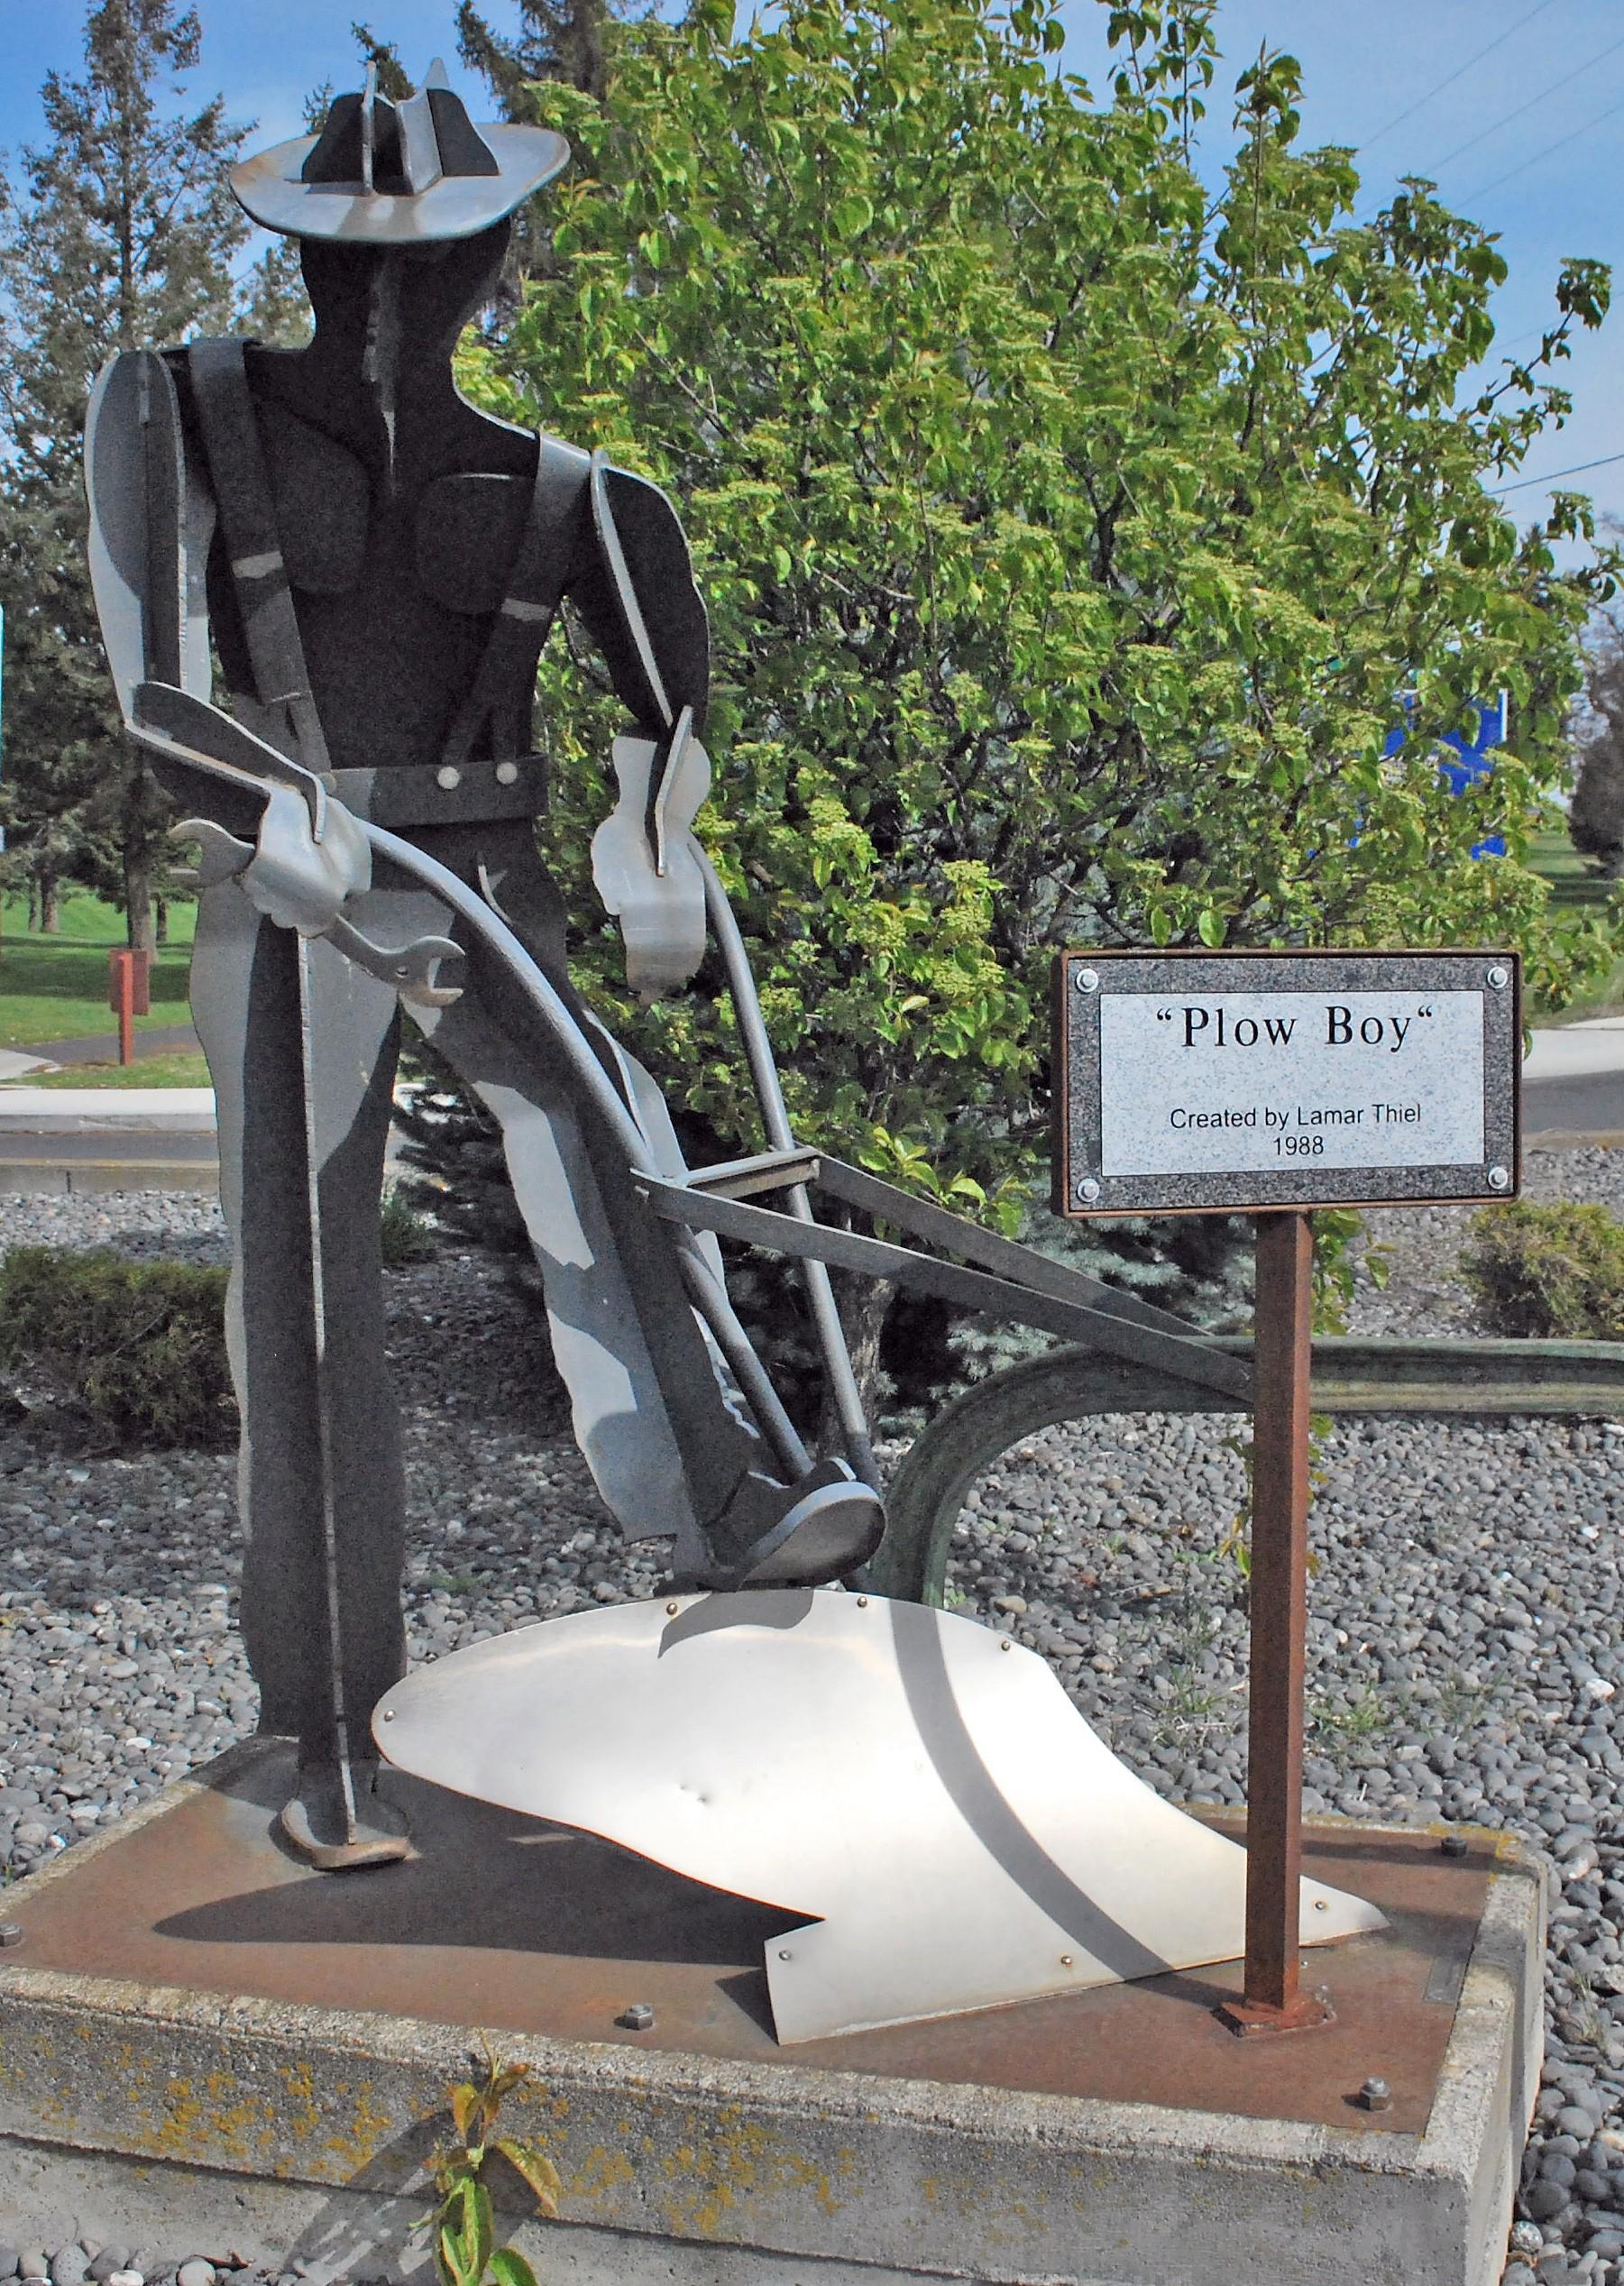 Plow Boy  - an early member of the Ritzville Heavy Metal Tour